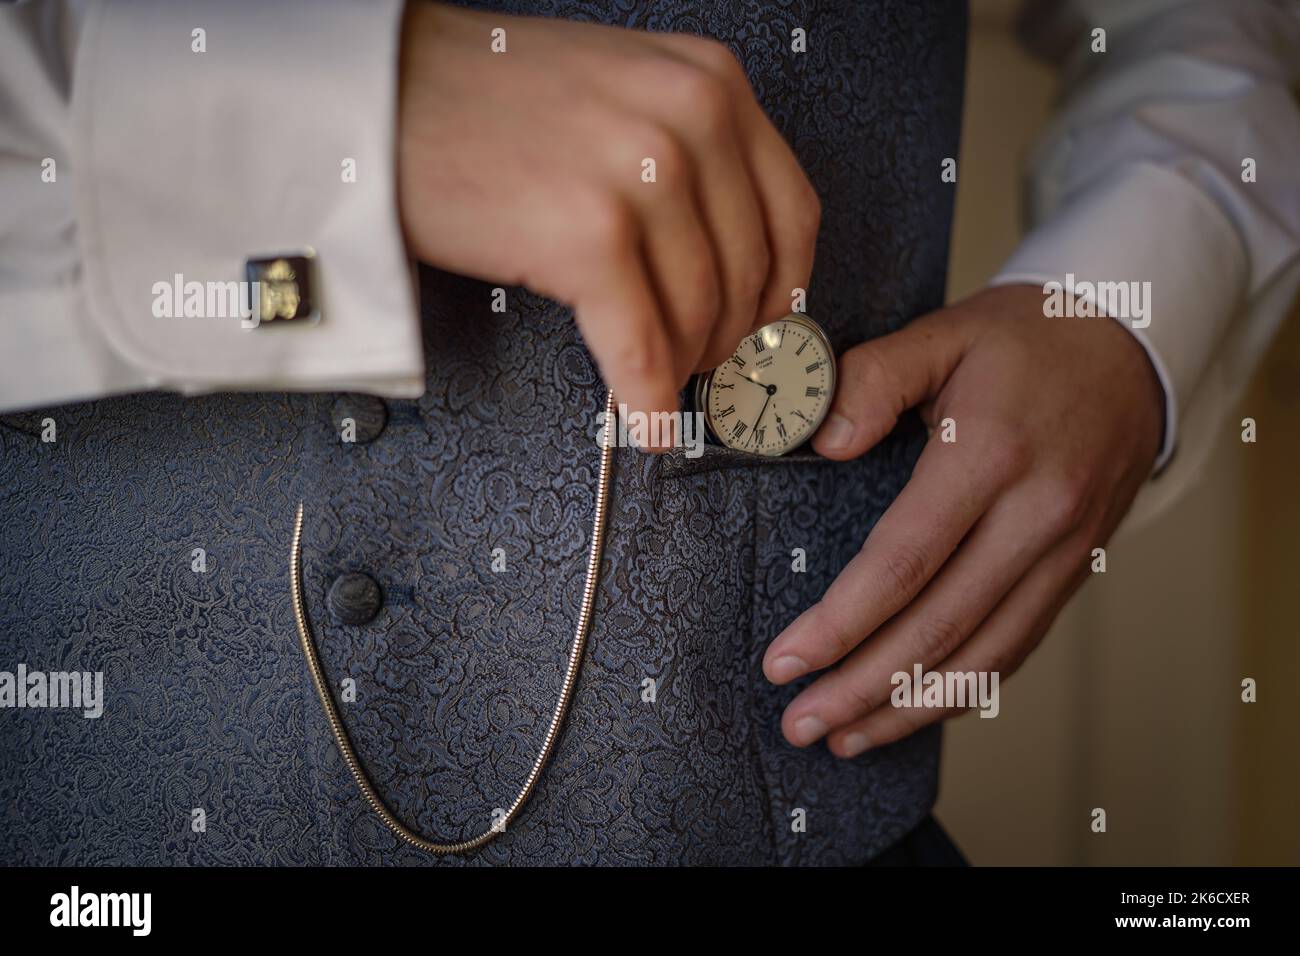 The hands of a man in an elegant suit holding a vintage stye fob watch Stock Photo